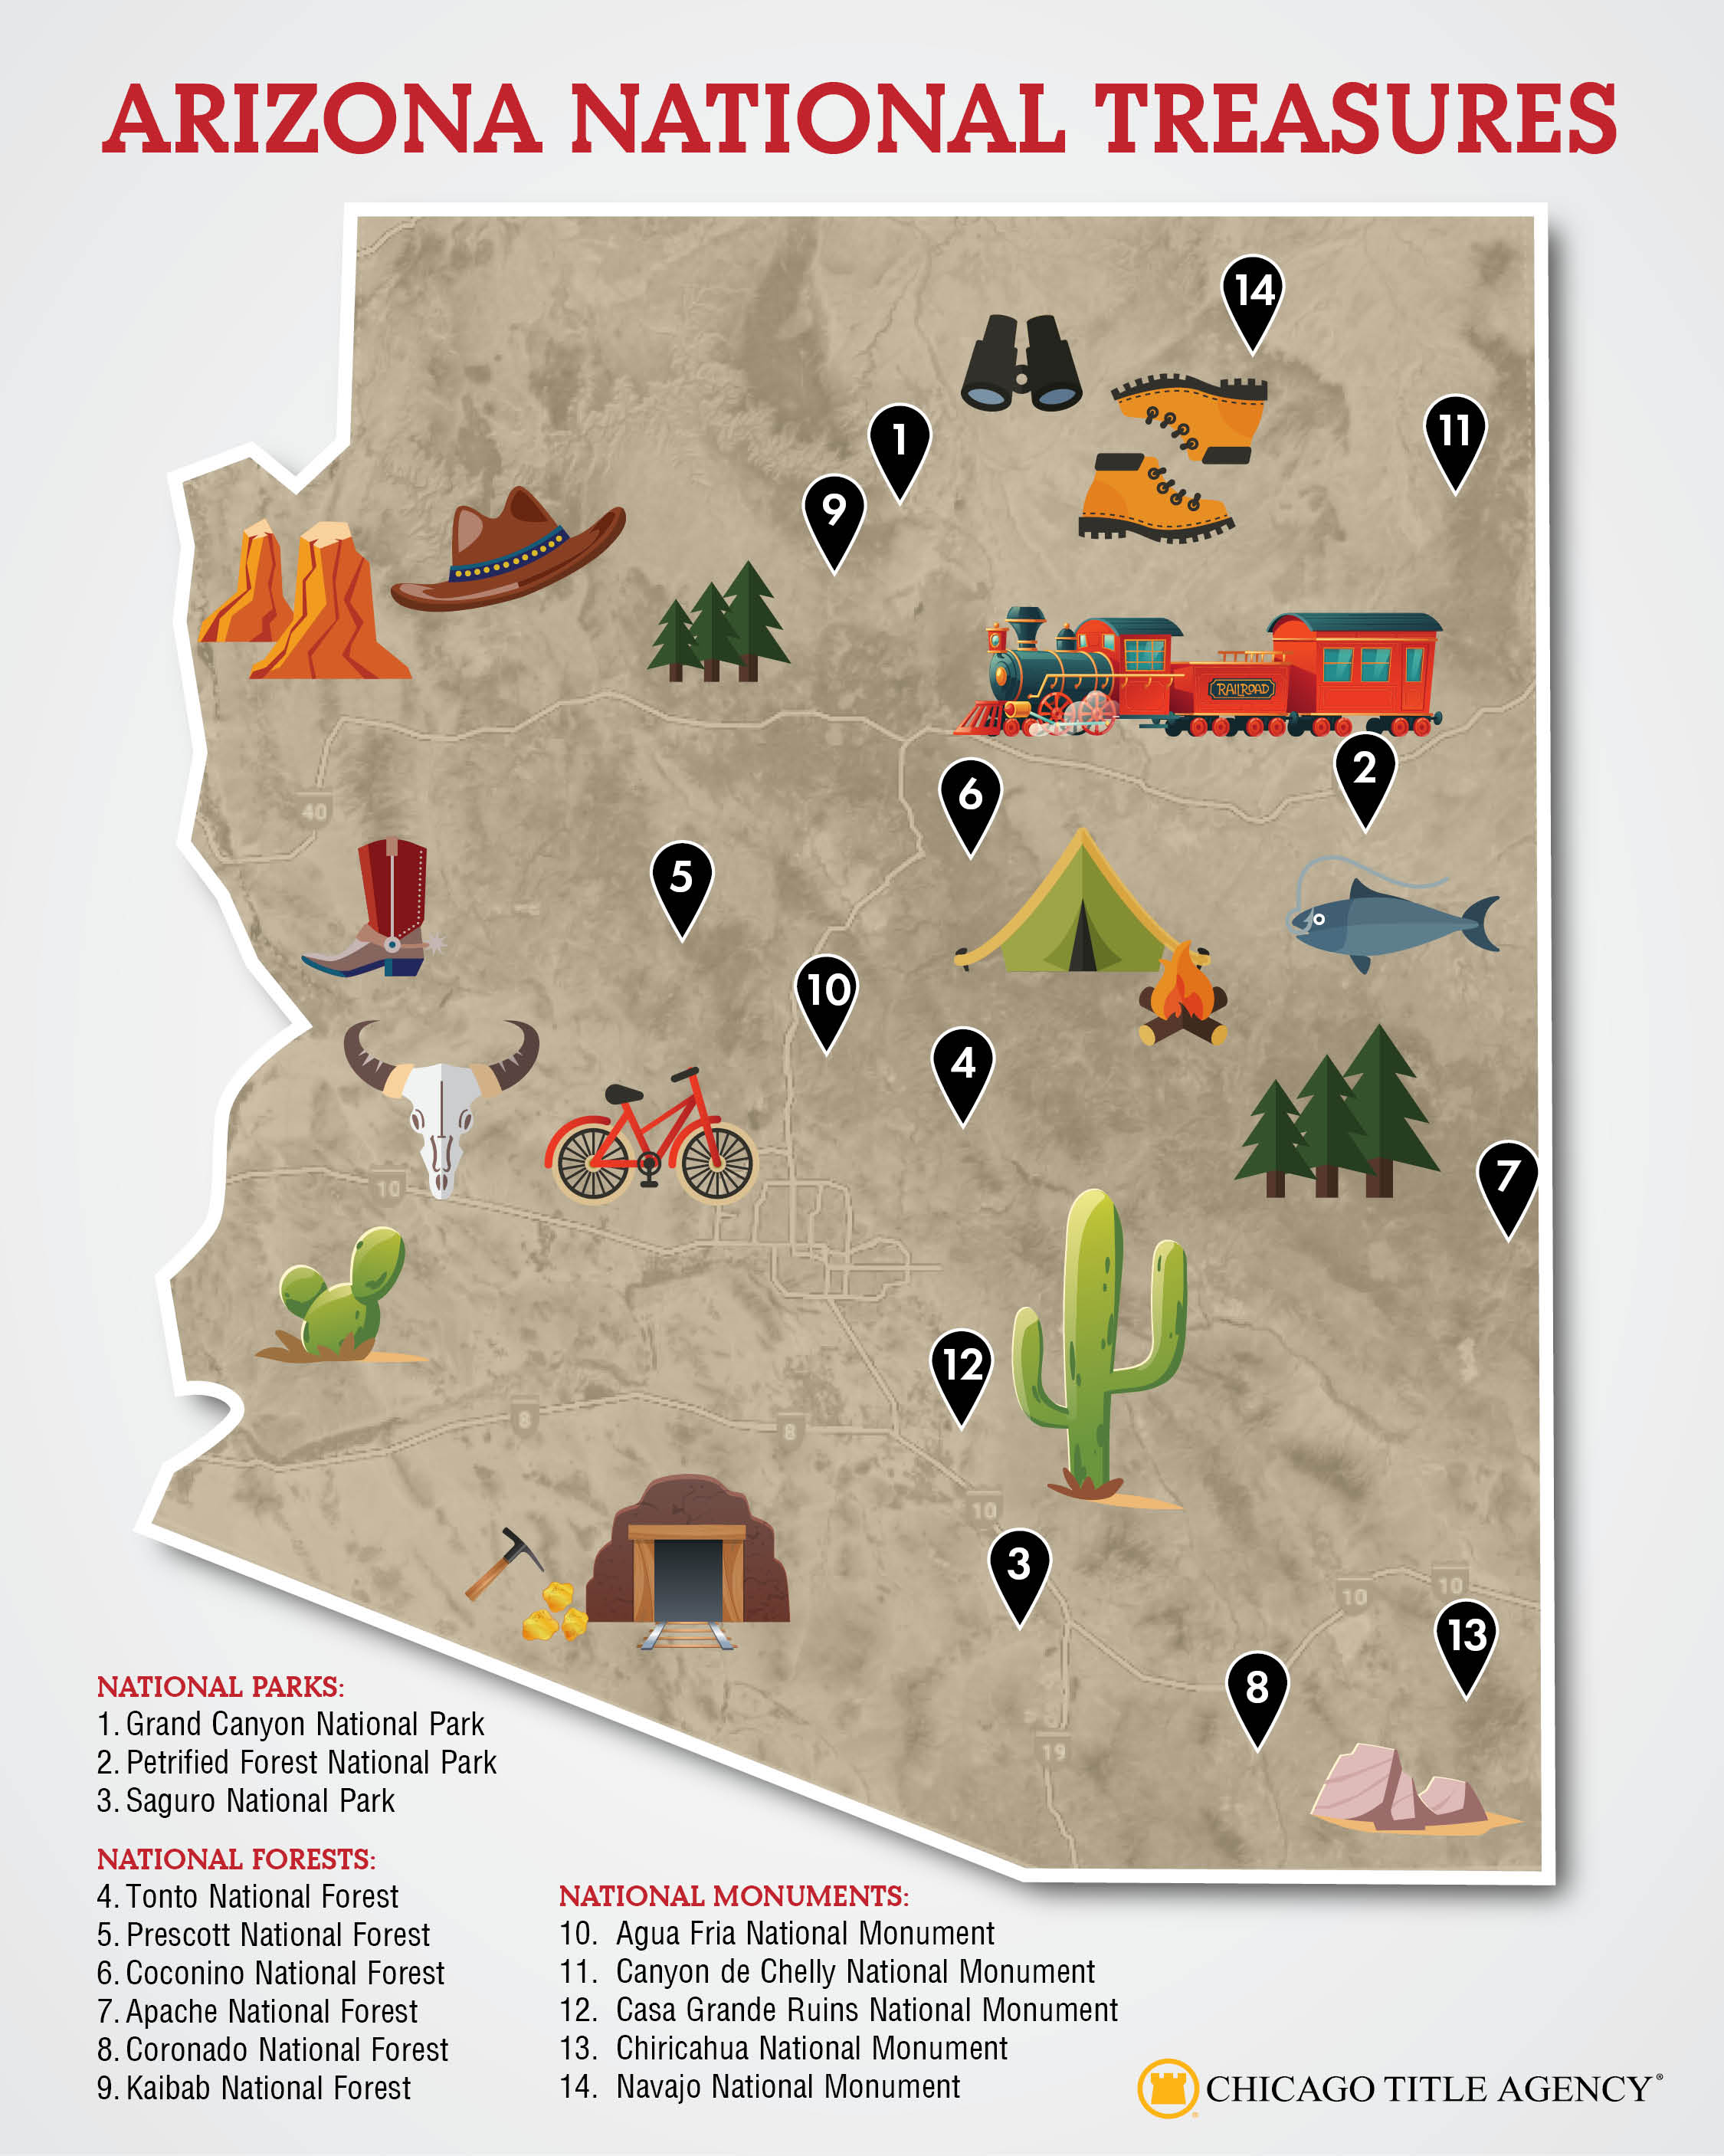 Check out these AZ National Treasures!